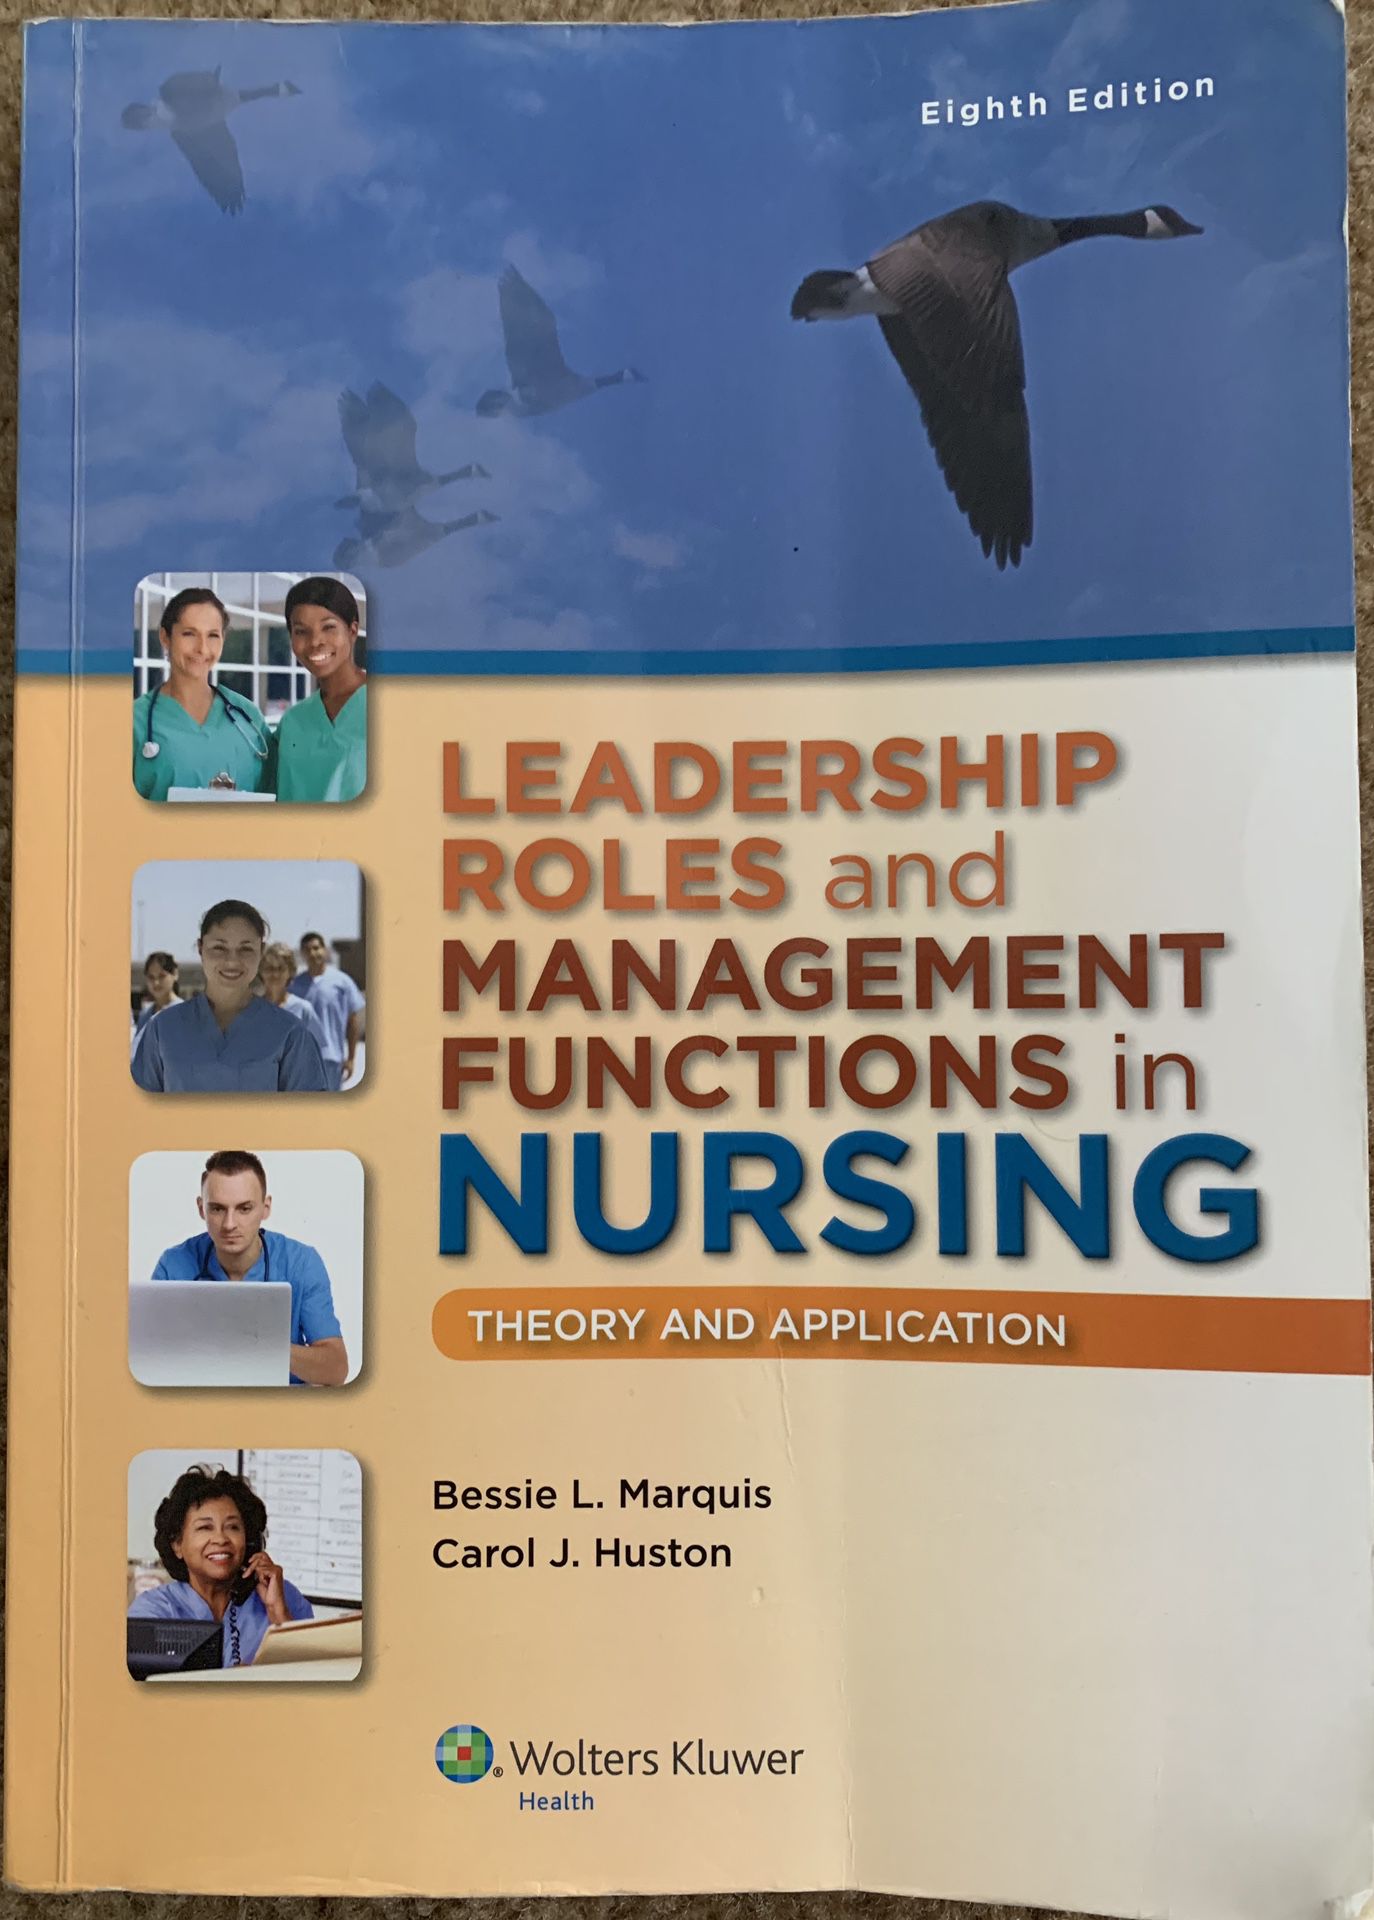 Leadership Roles and Management Functions in Nursing (Theory and Application)